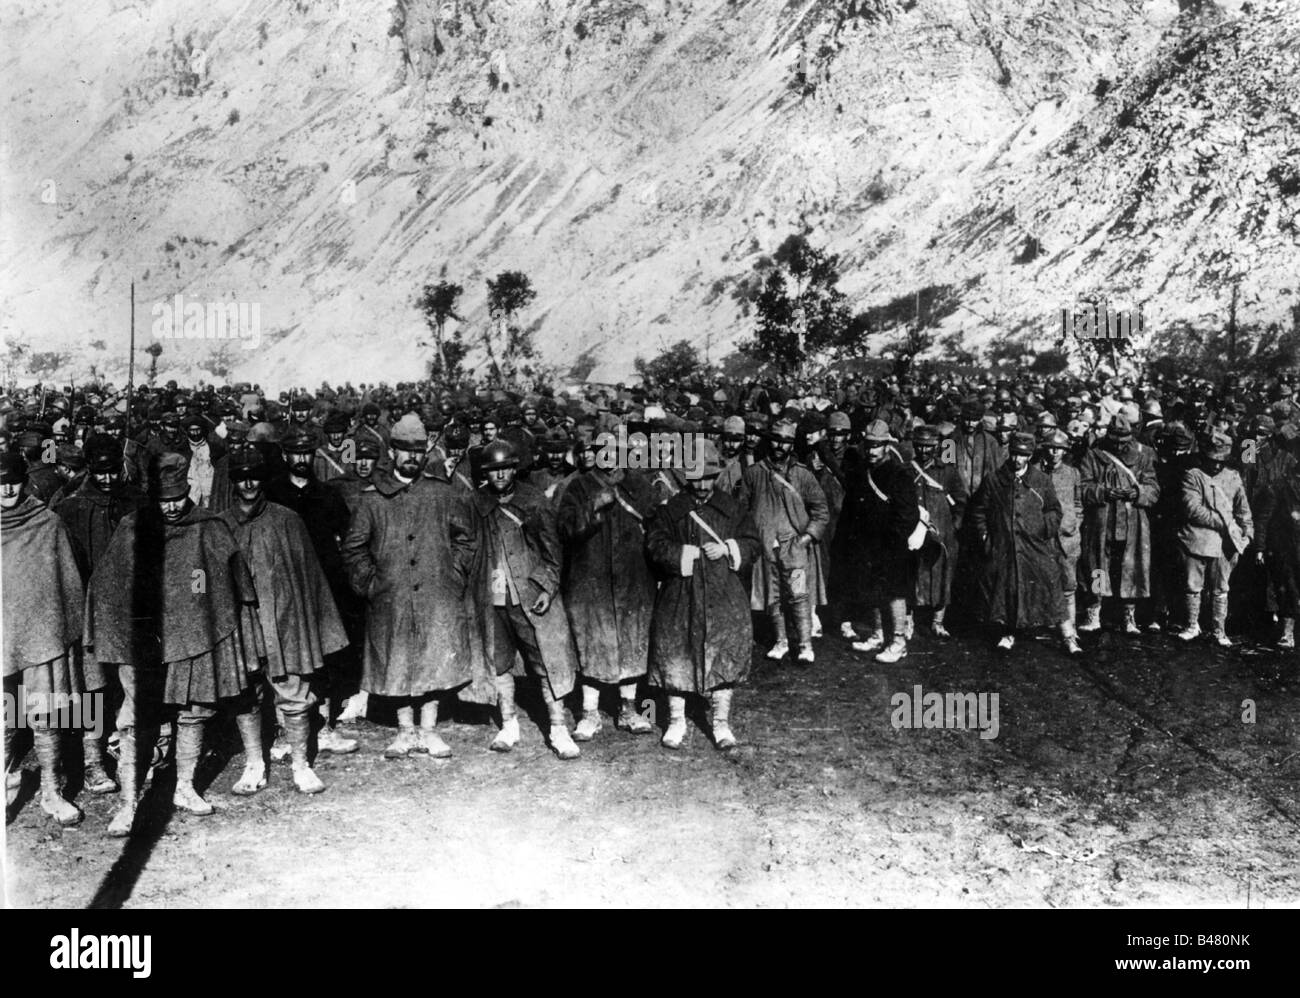 events, First World War / WWI, Italian Front, Isonzo Front, 12th Battle of the Isonzo, 24.10. - 2.12.1917, captured Italian soldiers, October 1917, Stock Photo